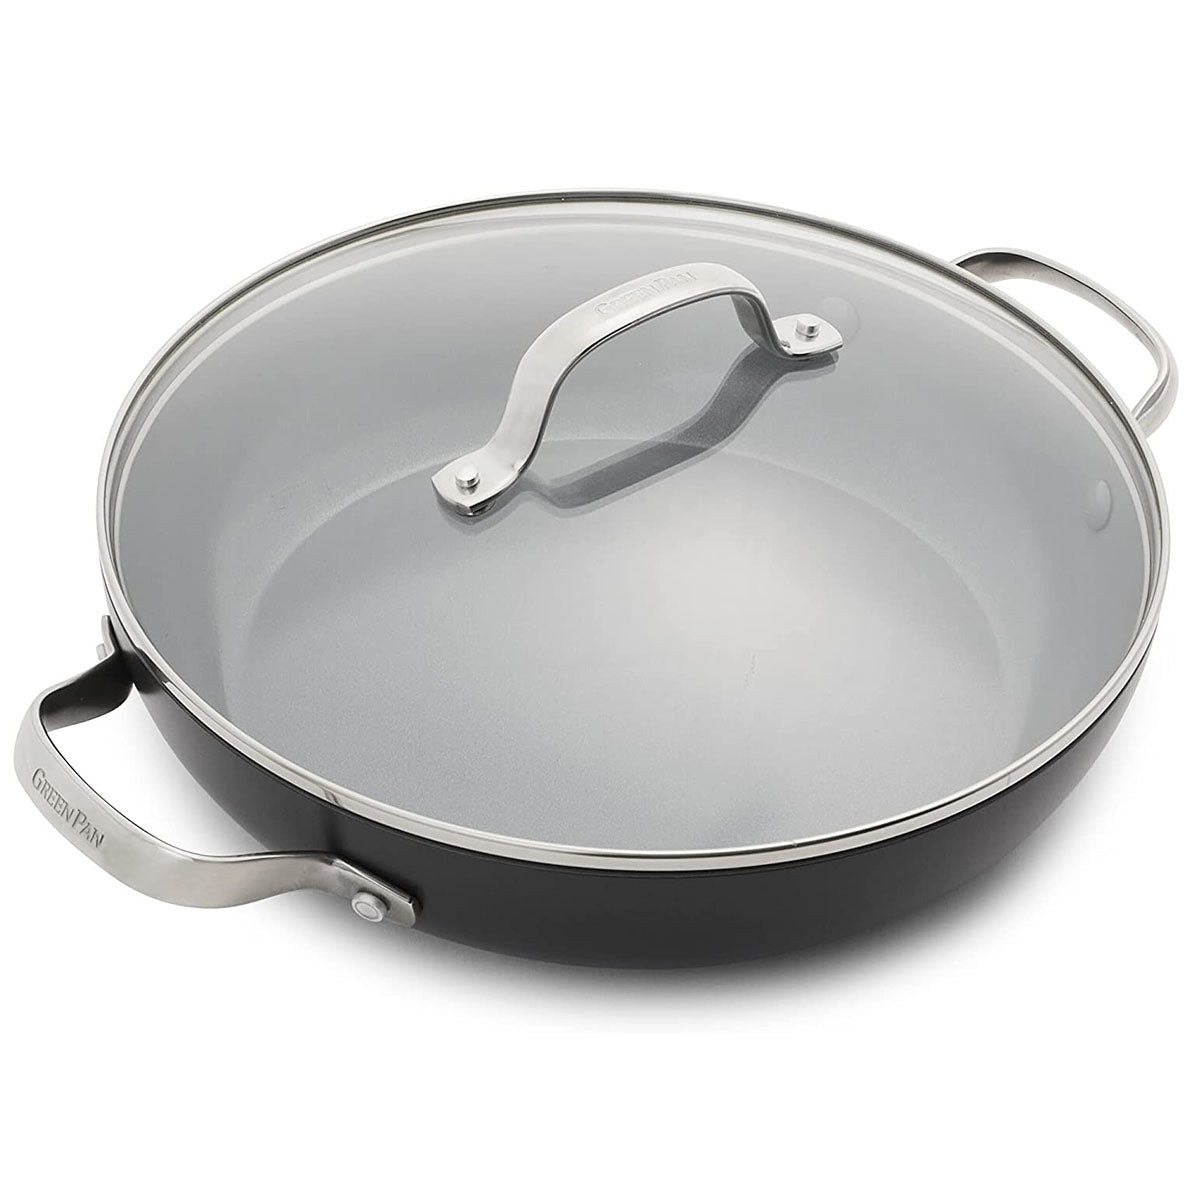 Kyocera 8-Inch Nonstick Ceramic Coated Fry Pan